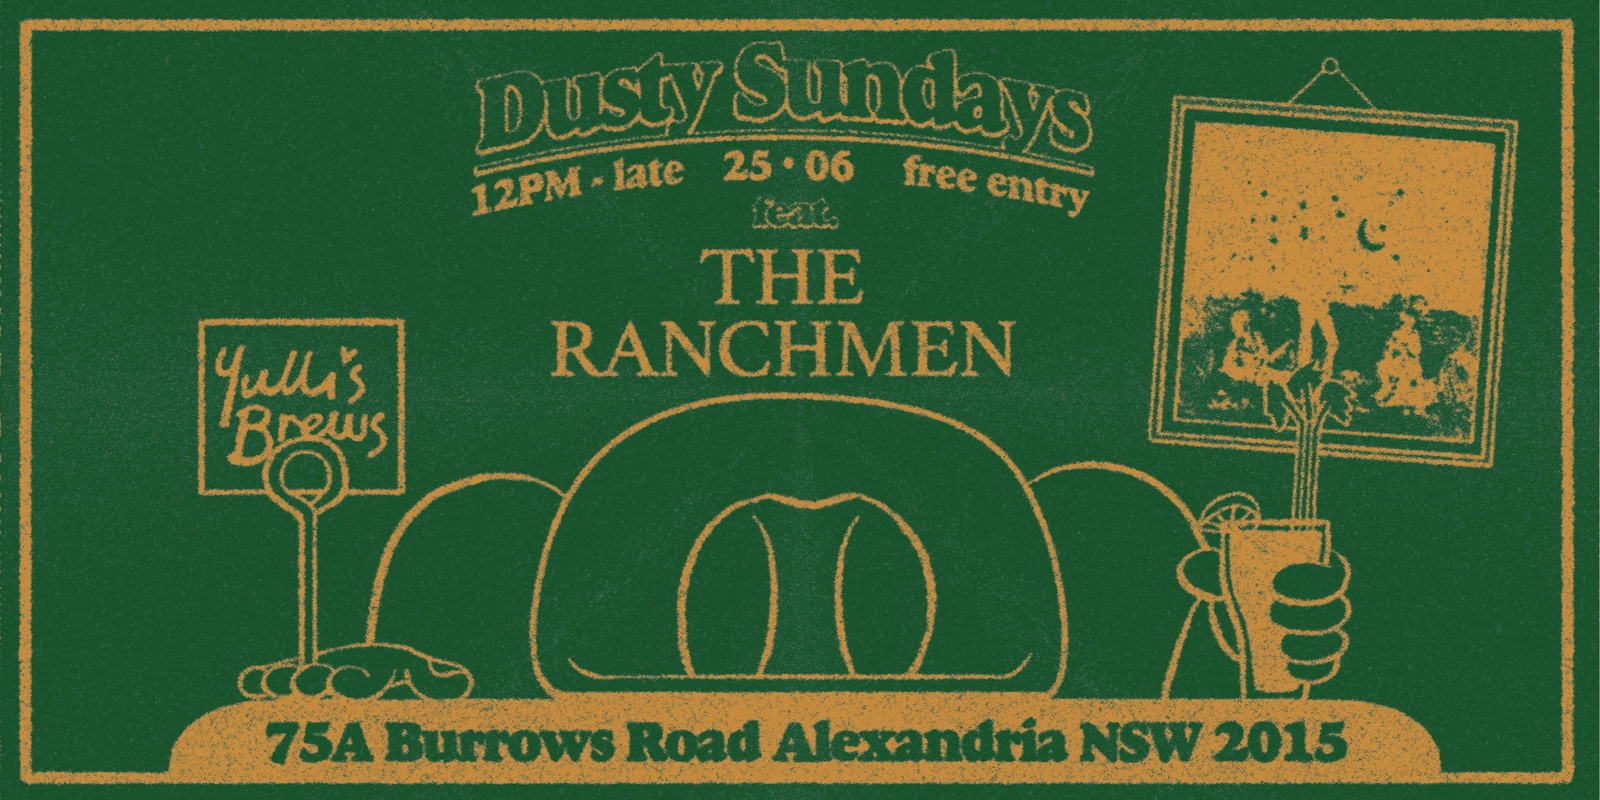 Banner image for DUSTY SUNDAYS - THE RANCHMEN 